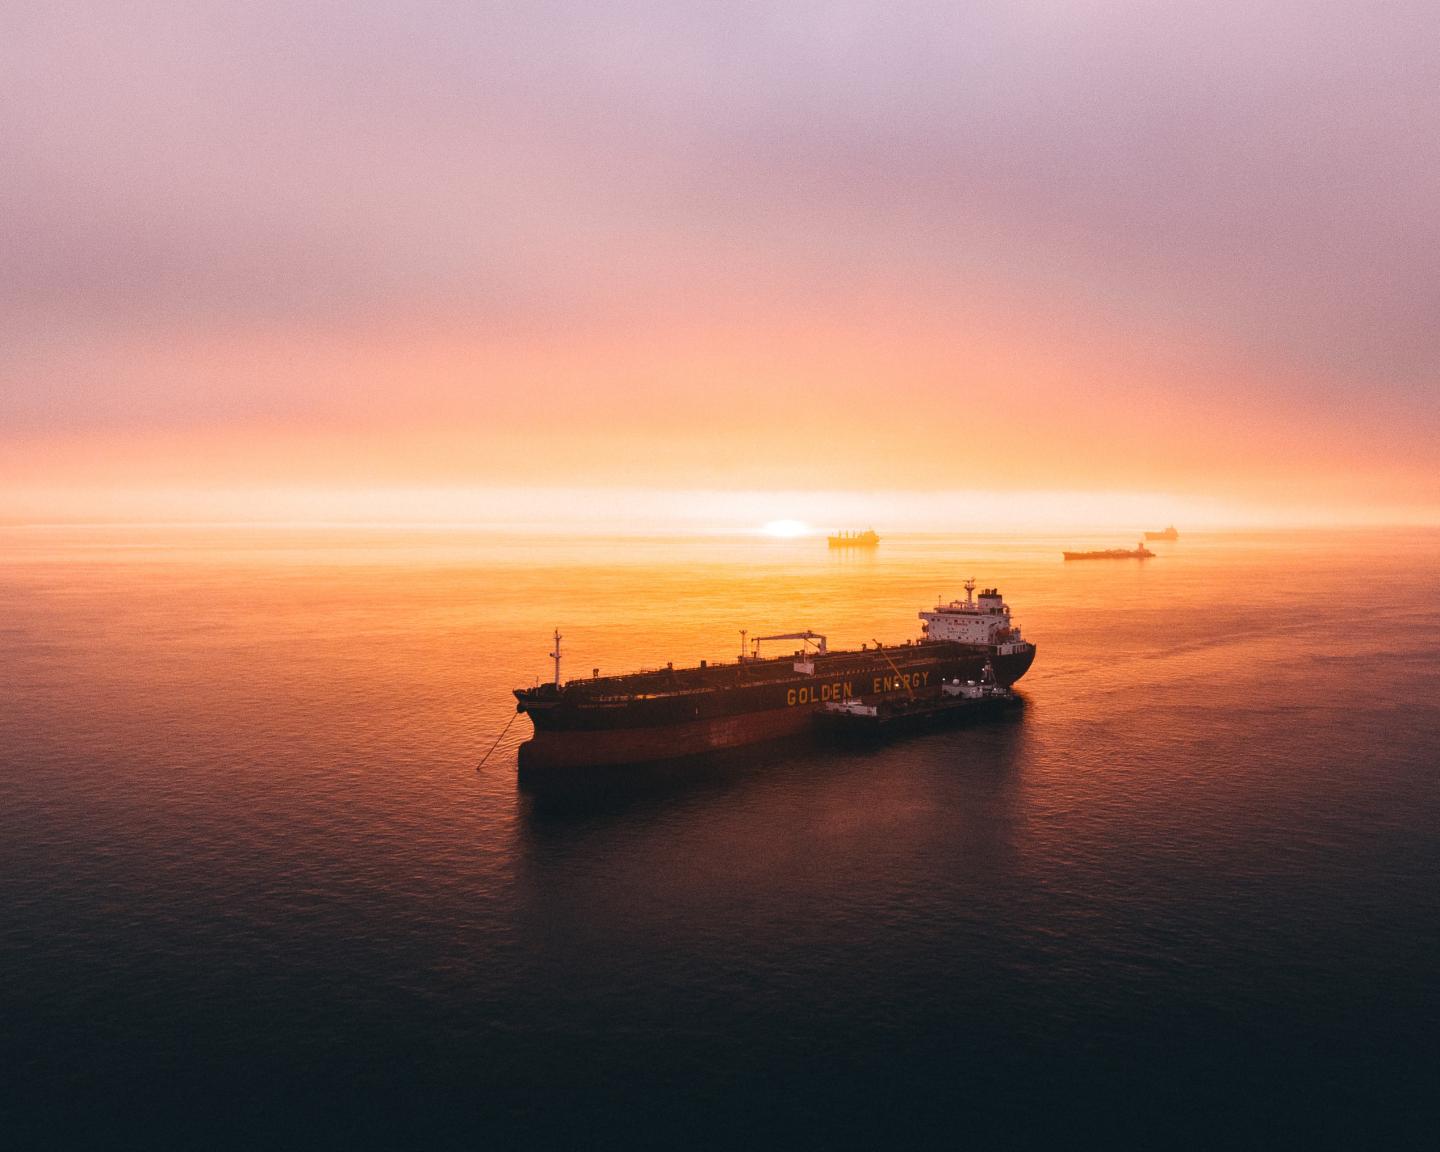 A container ship at sunset